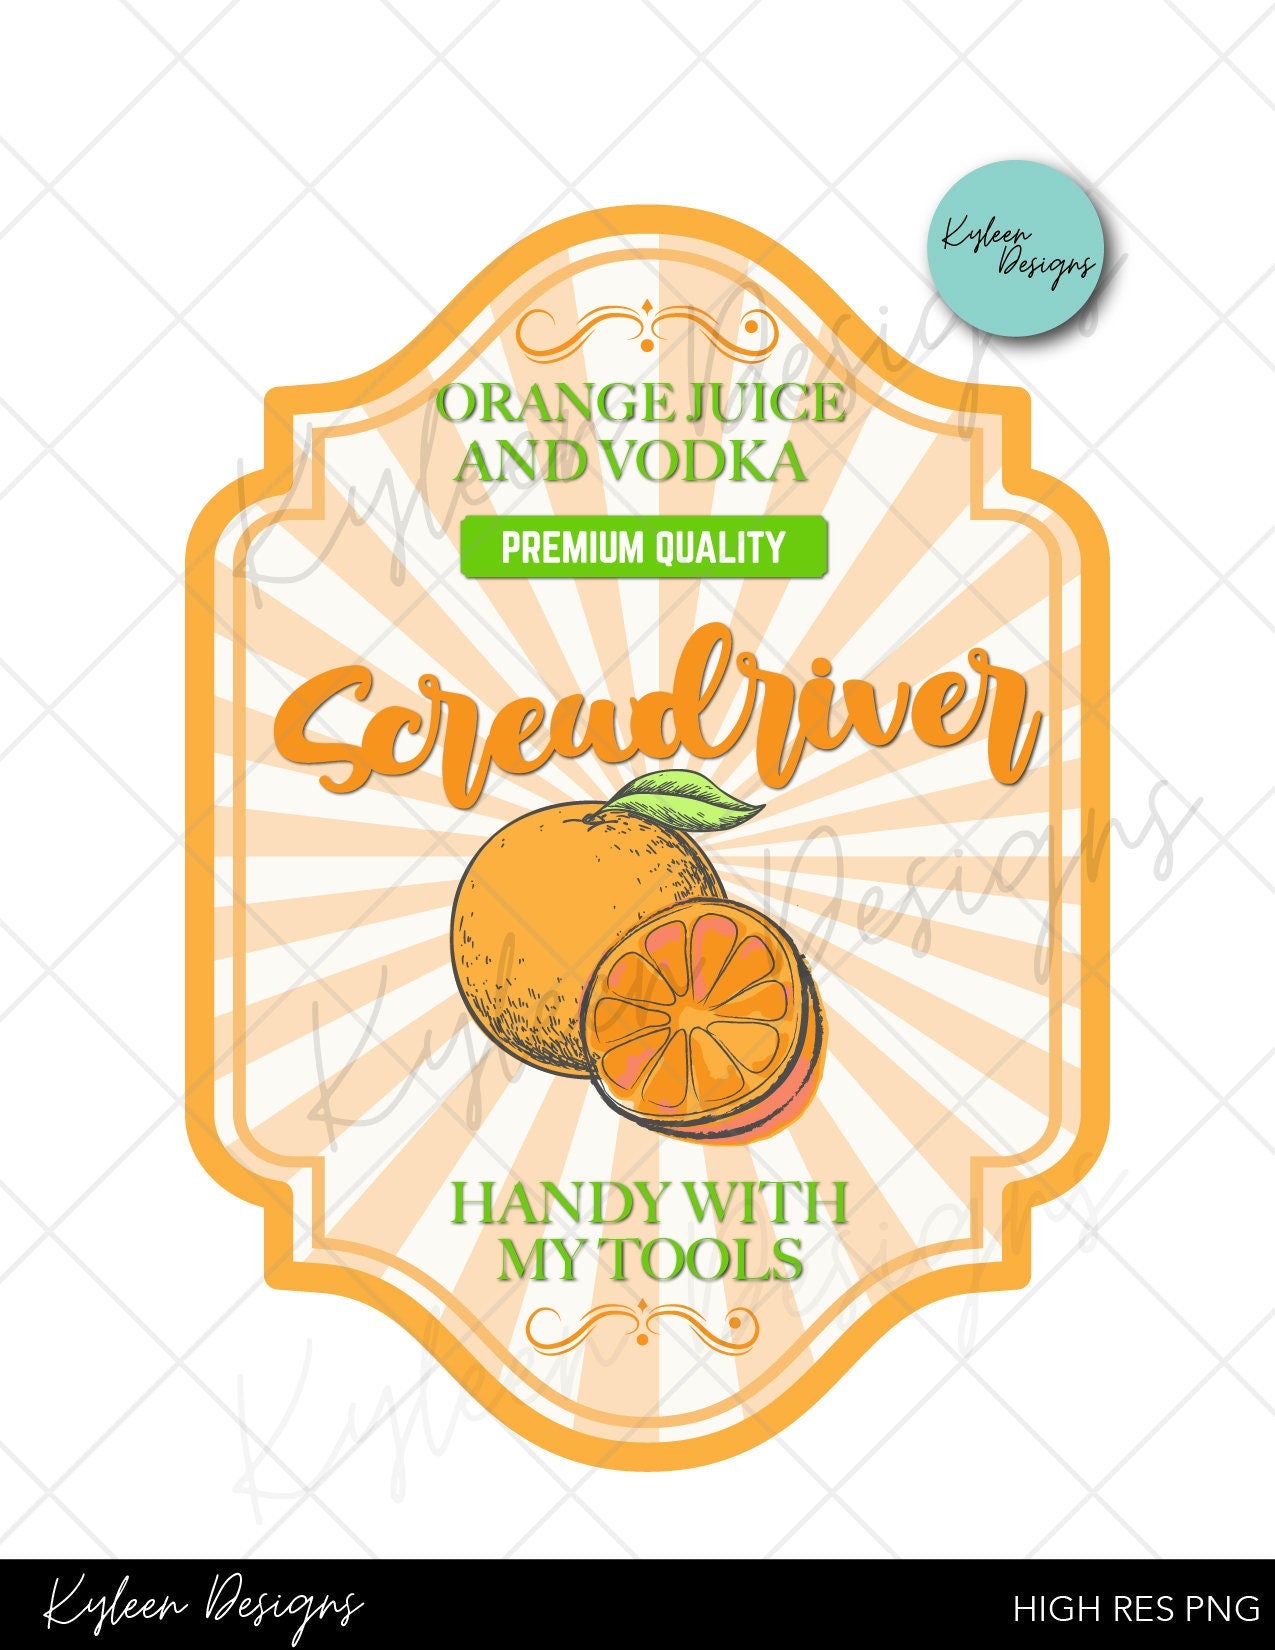 Screwdriver Drink Label High RES PNG for coffee/beer glass